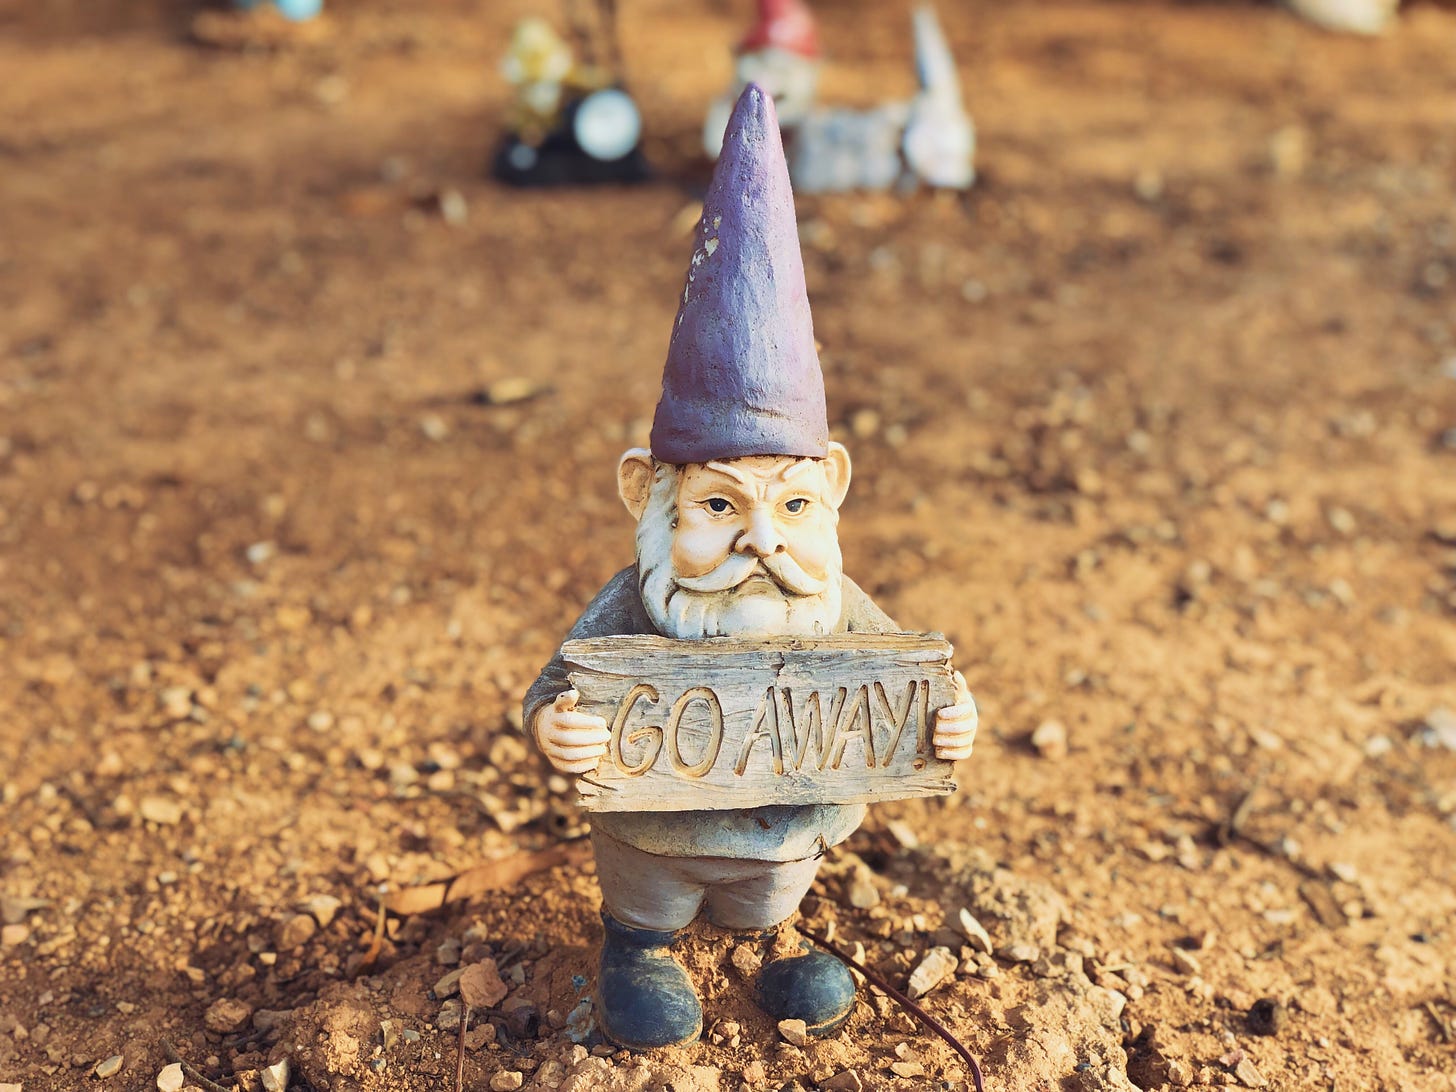 Photo of a garden gnome holding a sign that says "go away" in all caps